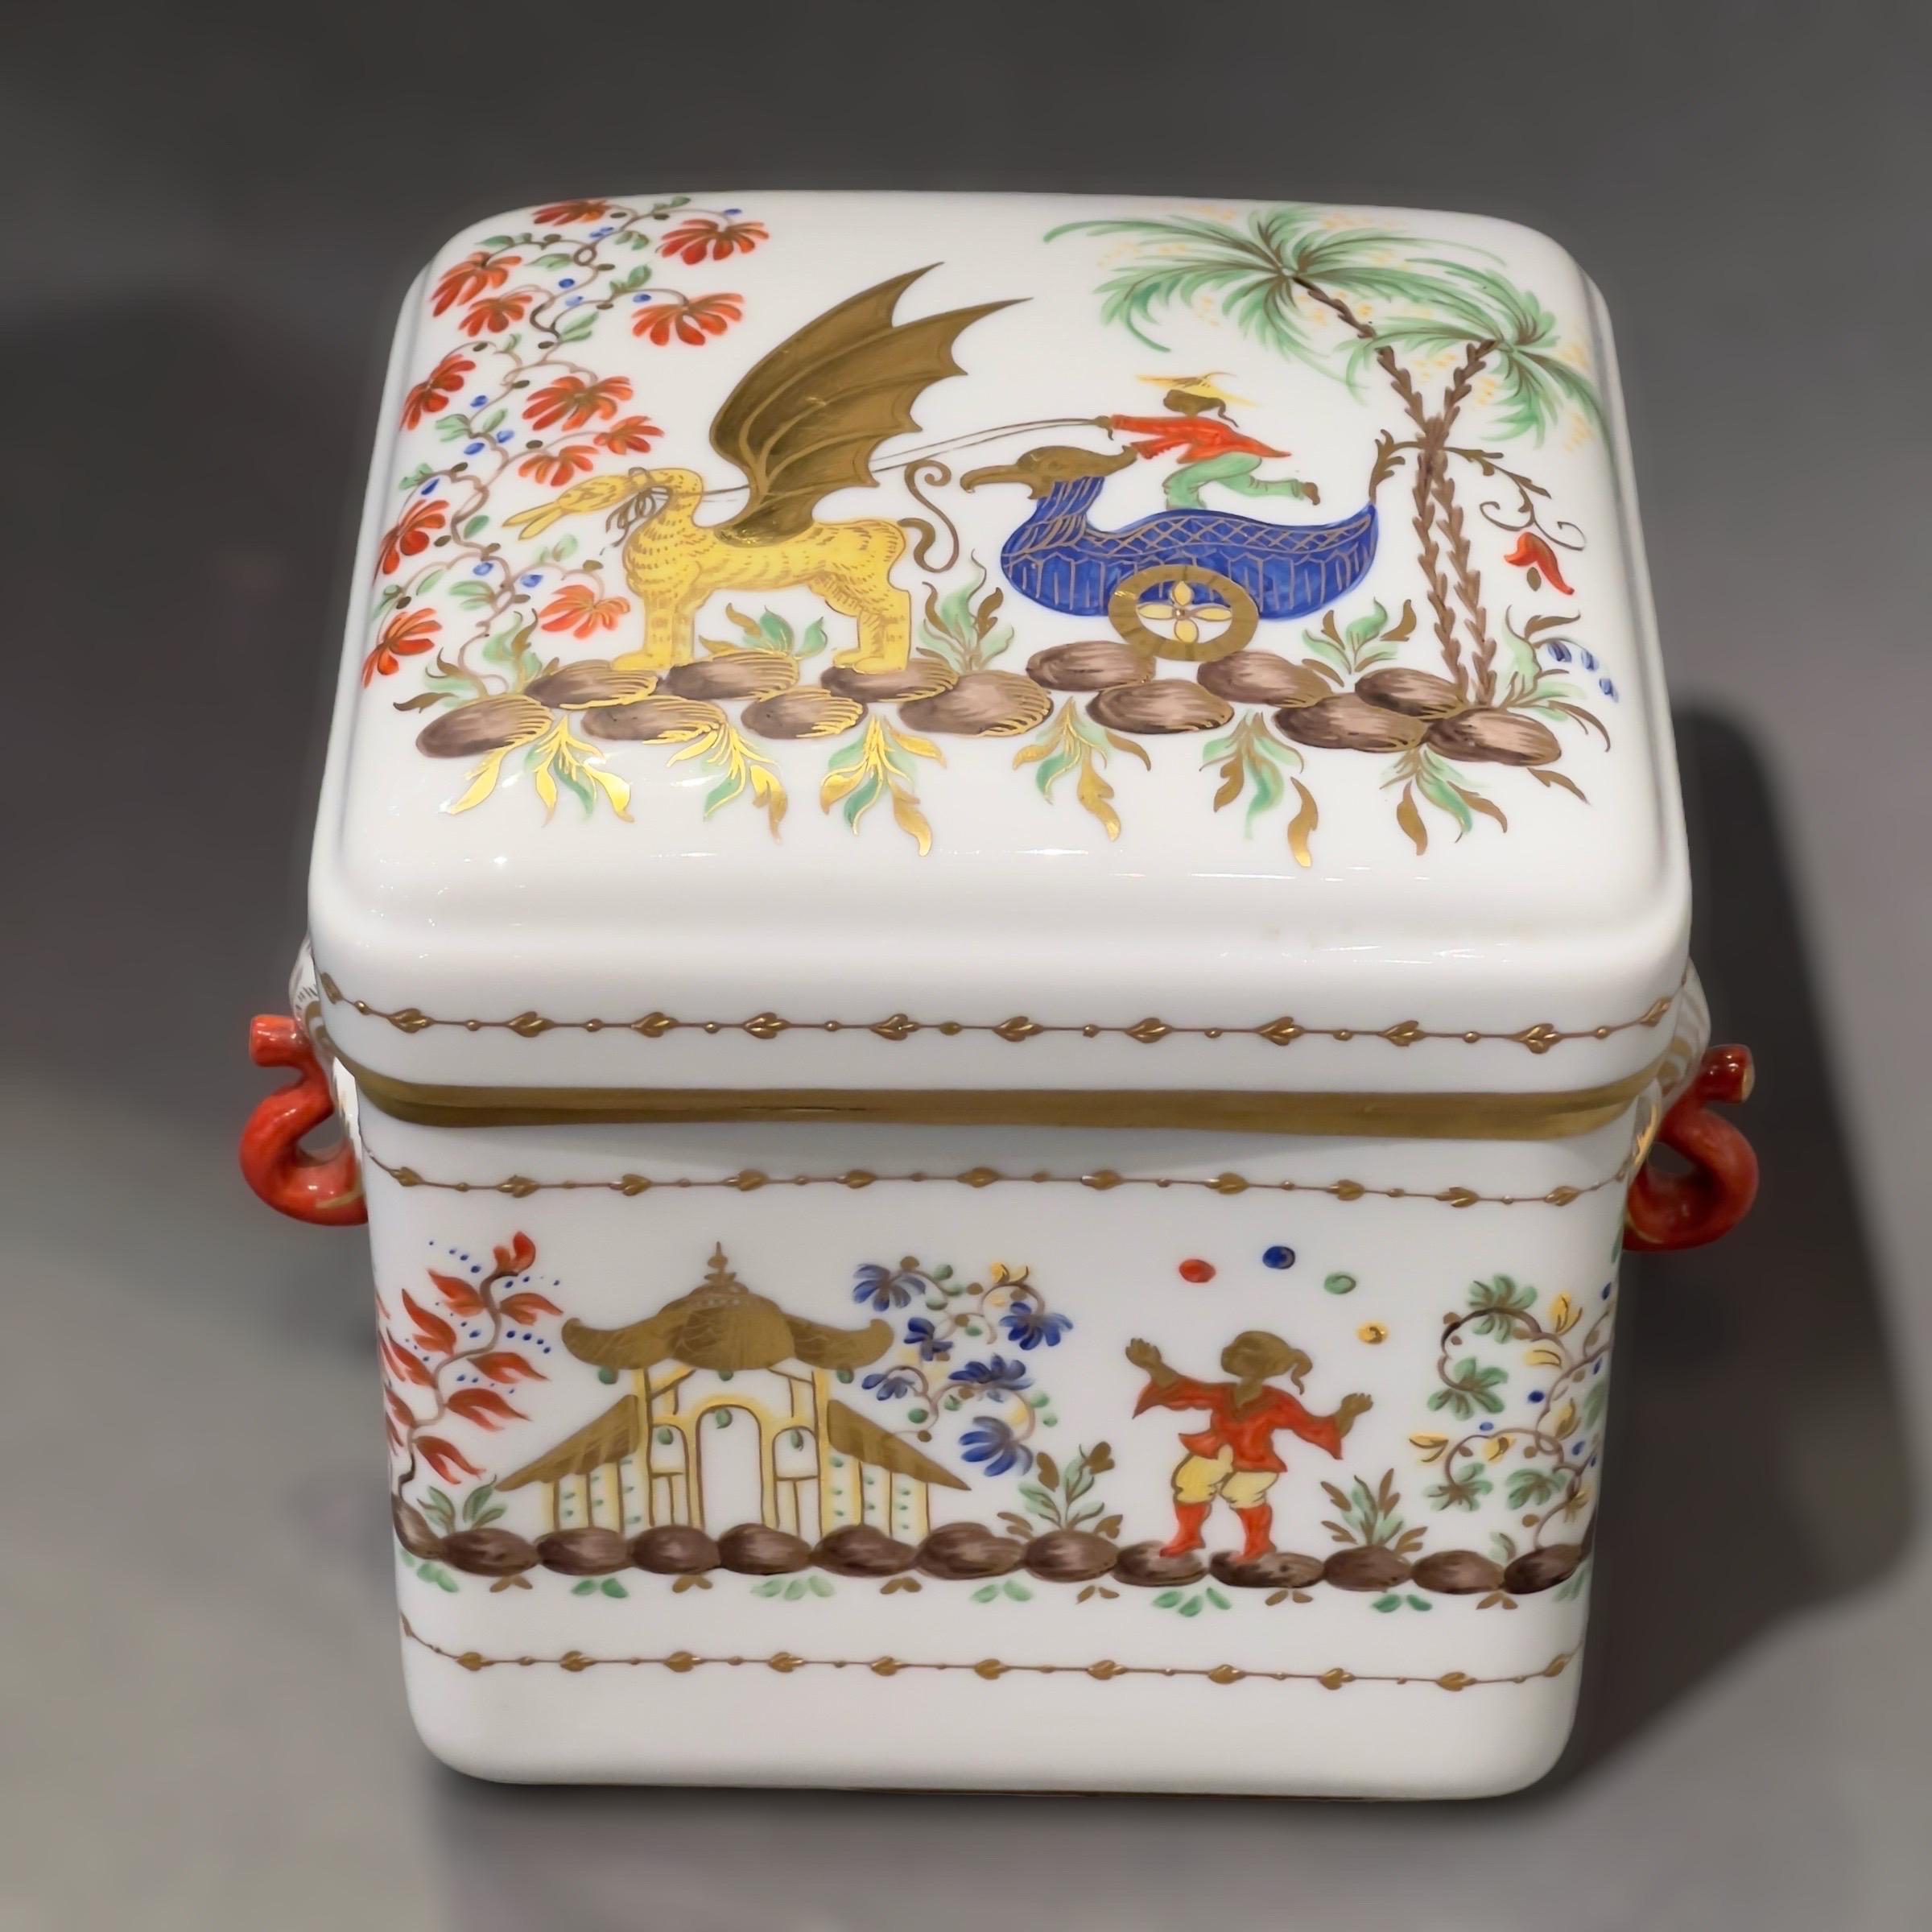 A large porcelain box made by Le Tallec in the Cirque Chinois Pattern (Chinese circus).
Beautifull side handles in the shape of an elephant.
The Cirque Chinois Pattern was originally created by Camille Le Tallec for Tiffany & Co
It is now